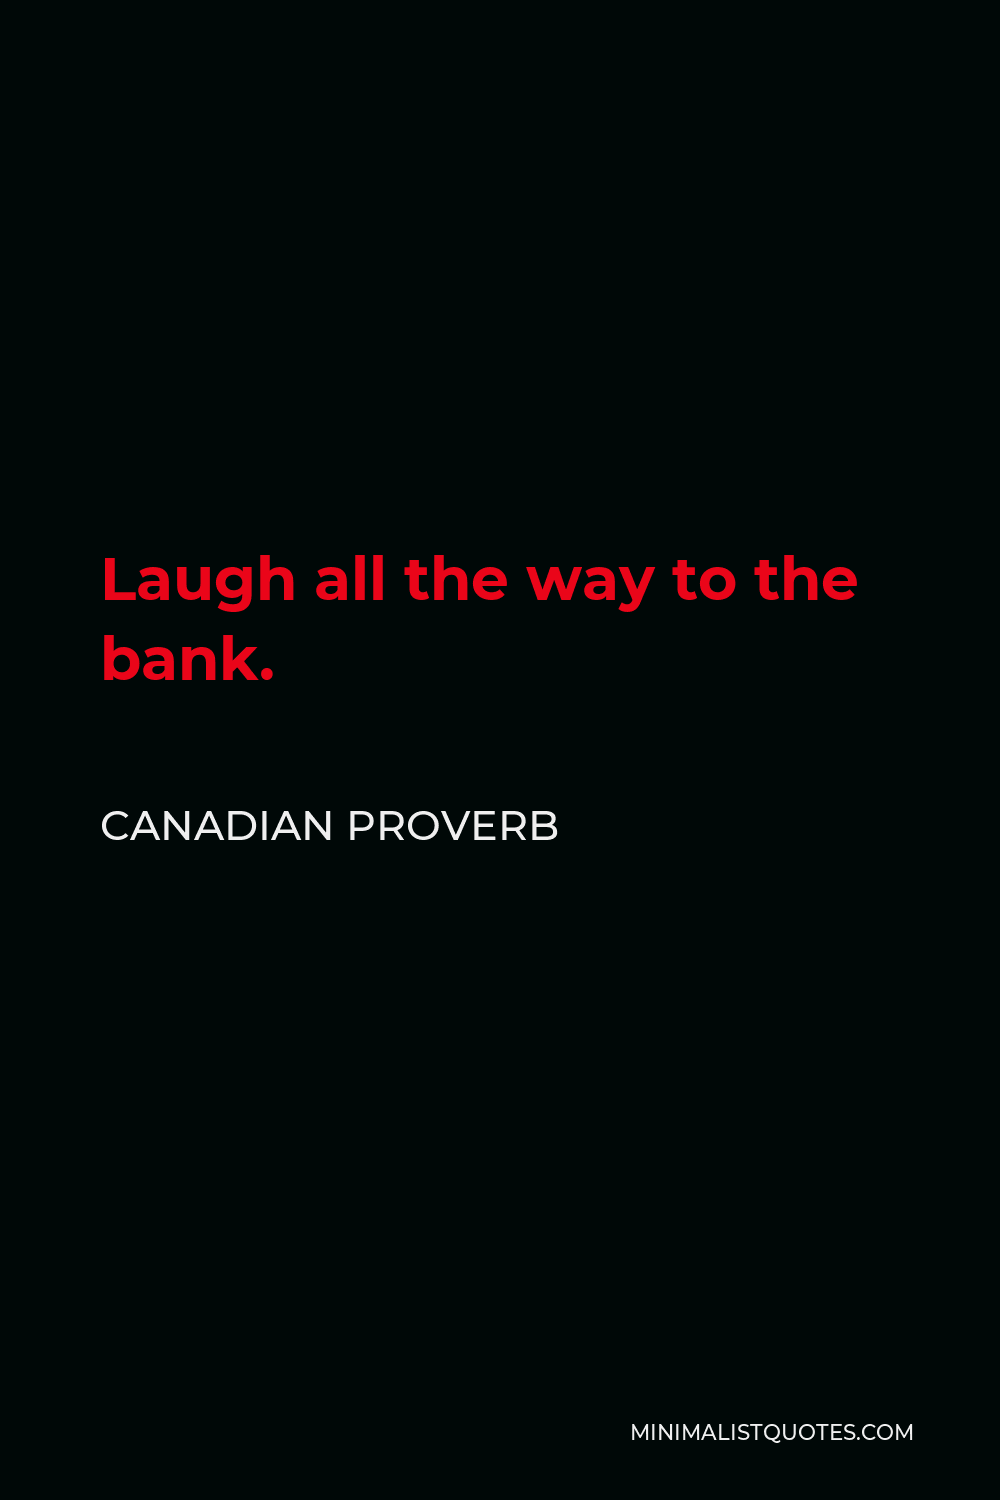 Canadian Proverb Quote - Laugh all the way to the bank.